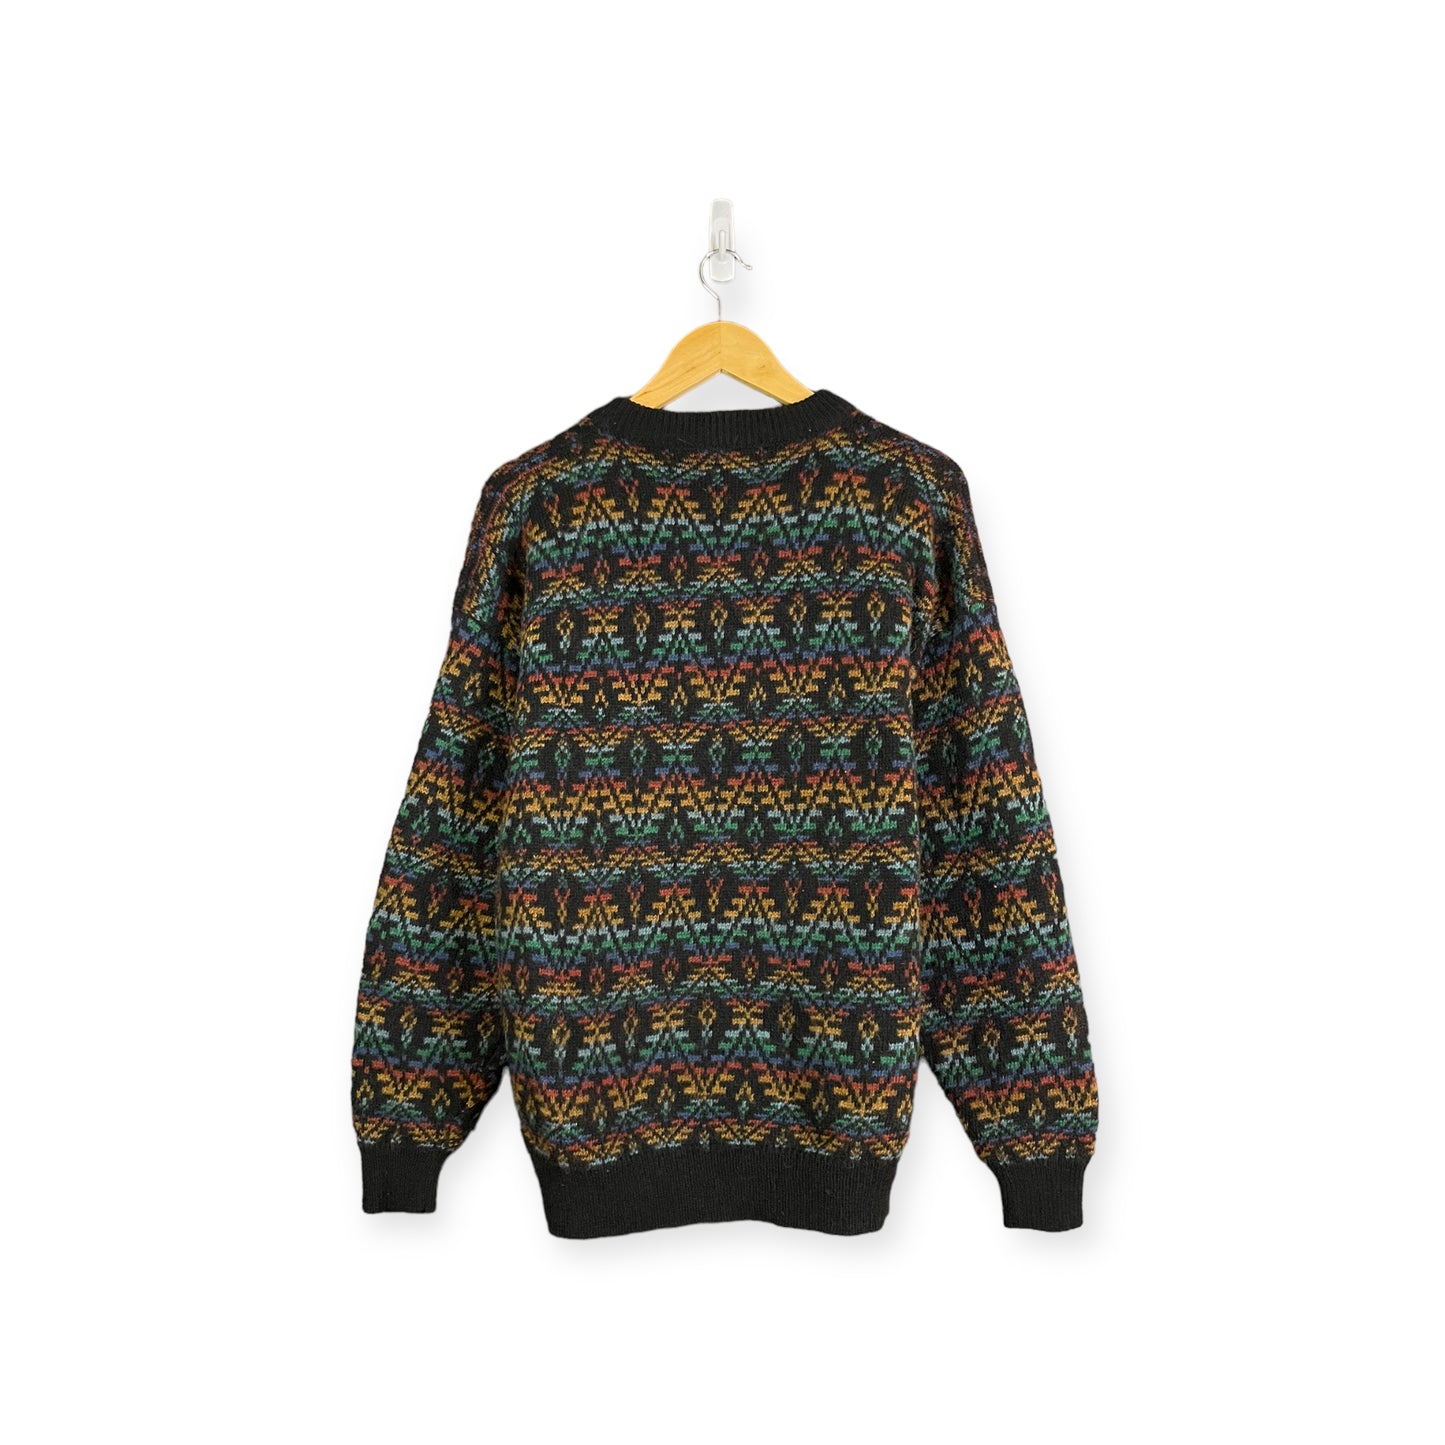 90s Pattern Knitted Sweater Sz. S